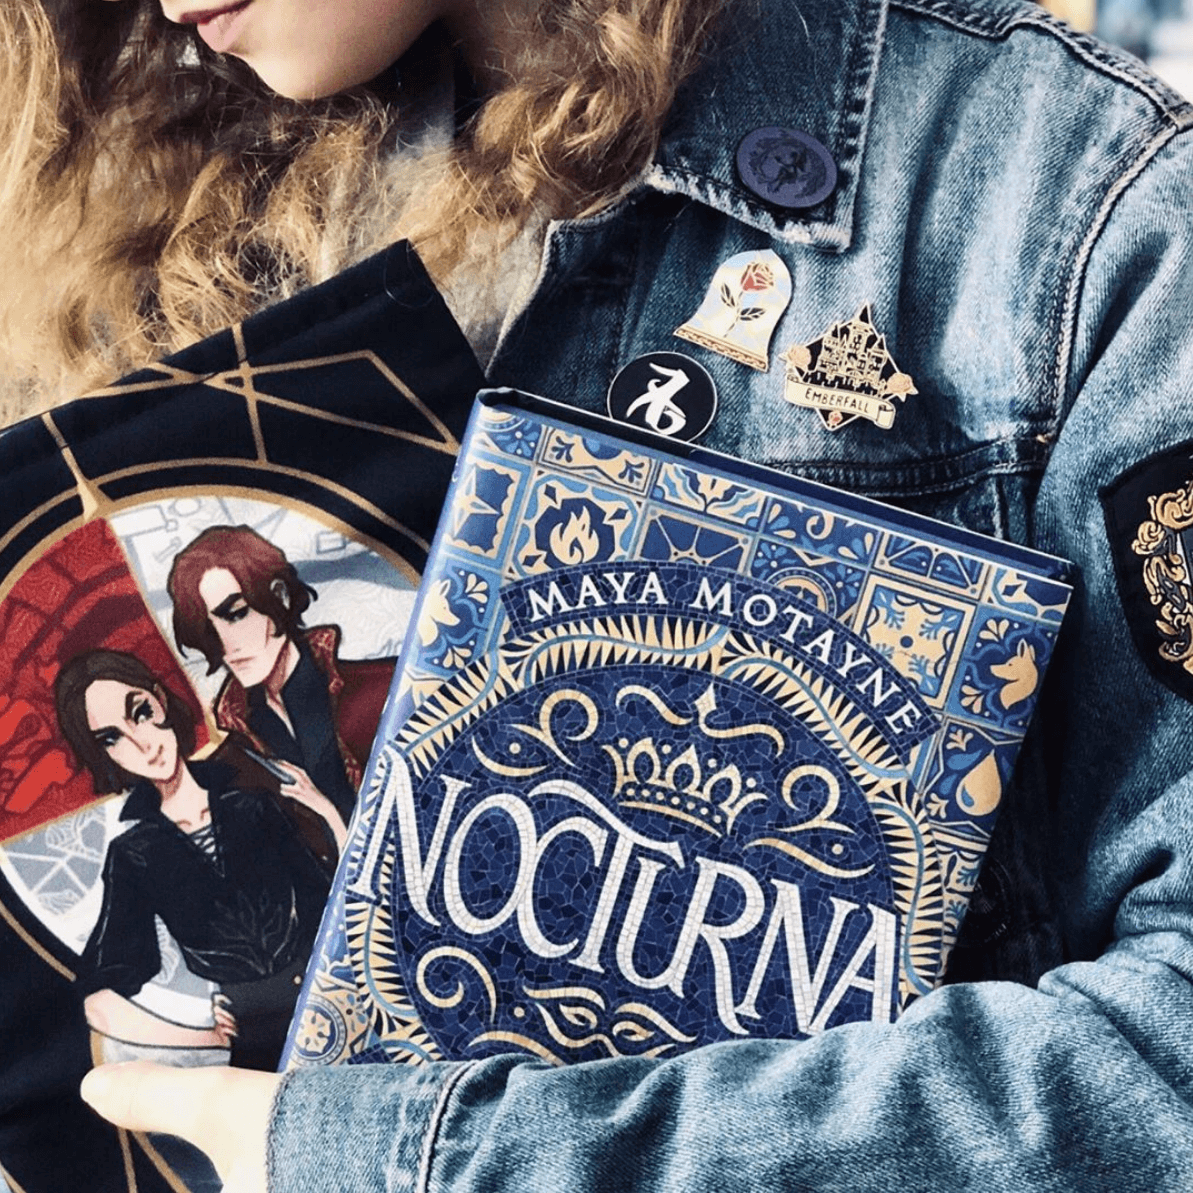 Nocturna Readalong: Day 4